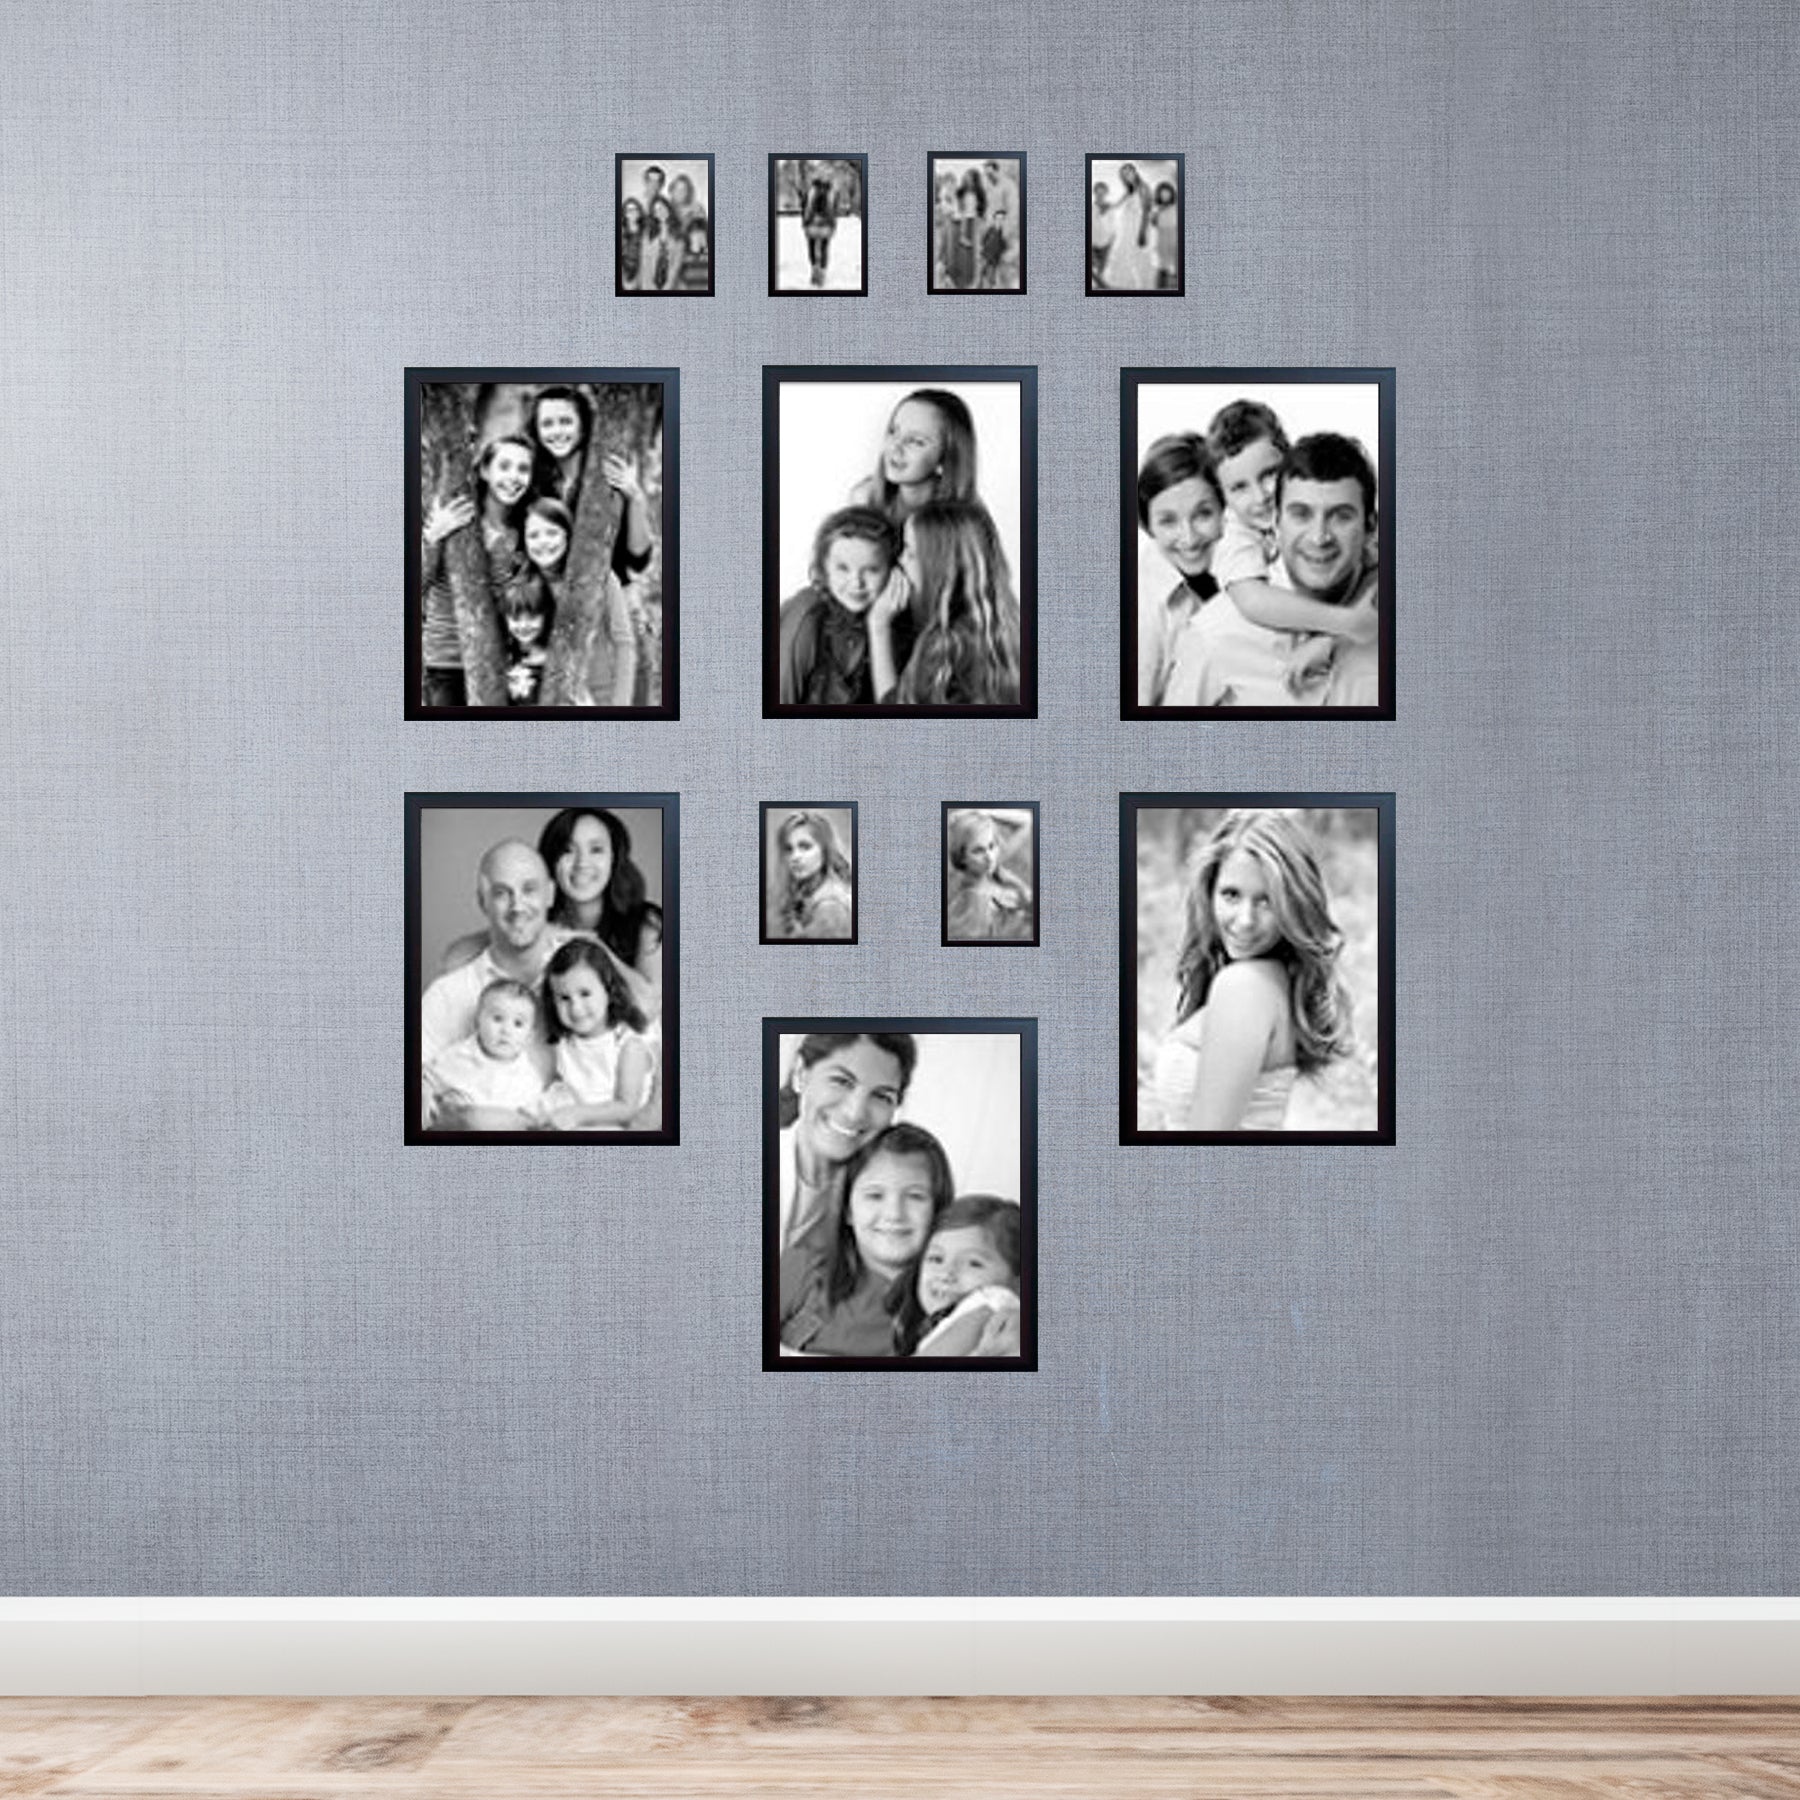 Pack of 12 Wall Art Family Collage Photo Frames, Custom Pics Free Print (6 X 16x12 inches, 6 X 6x4 inches)